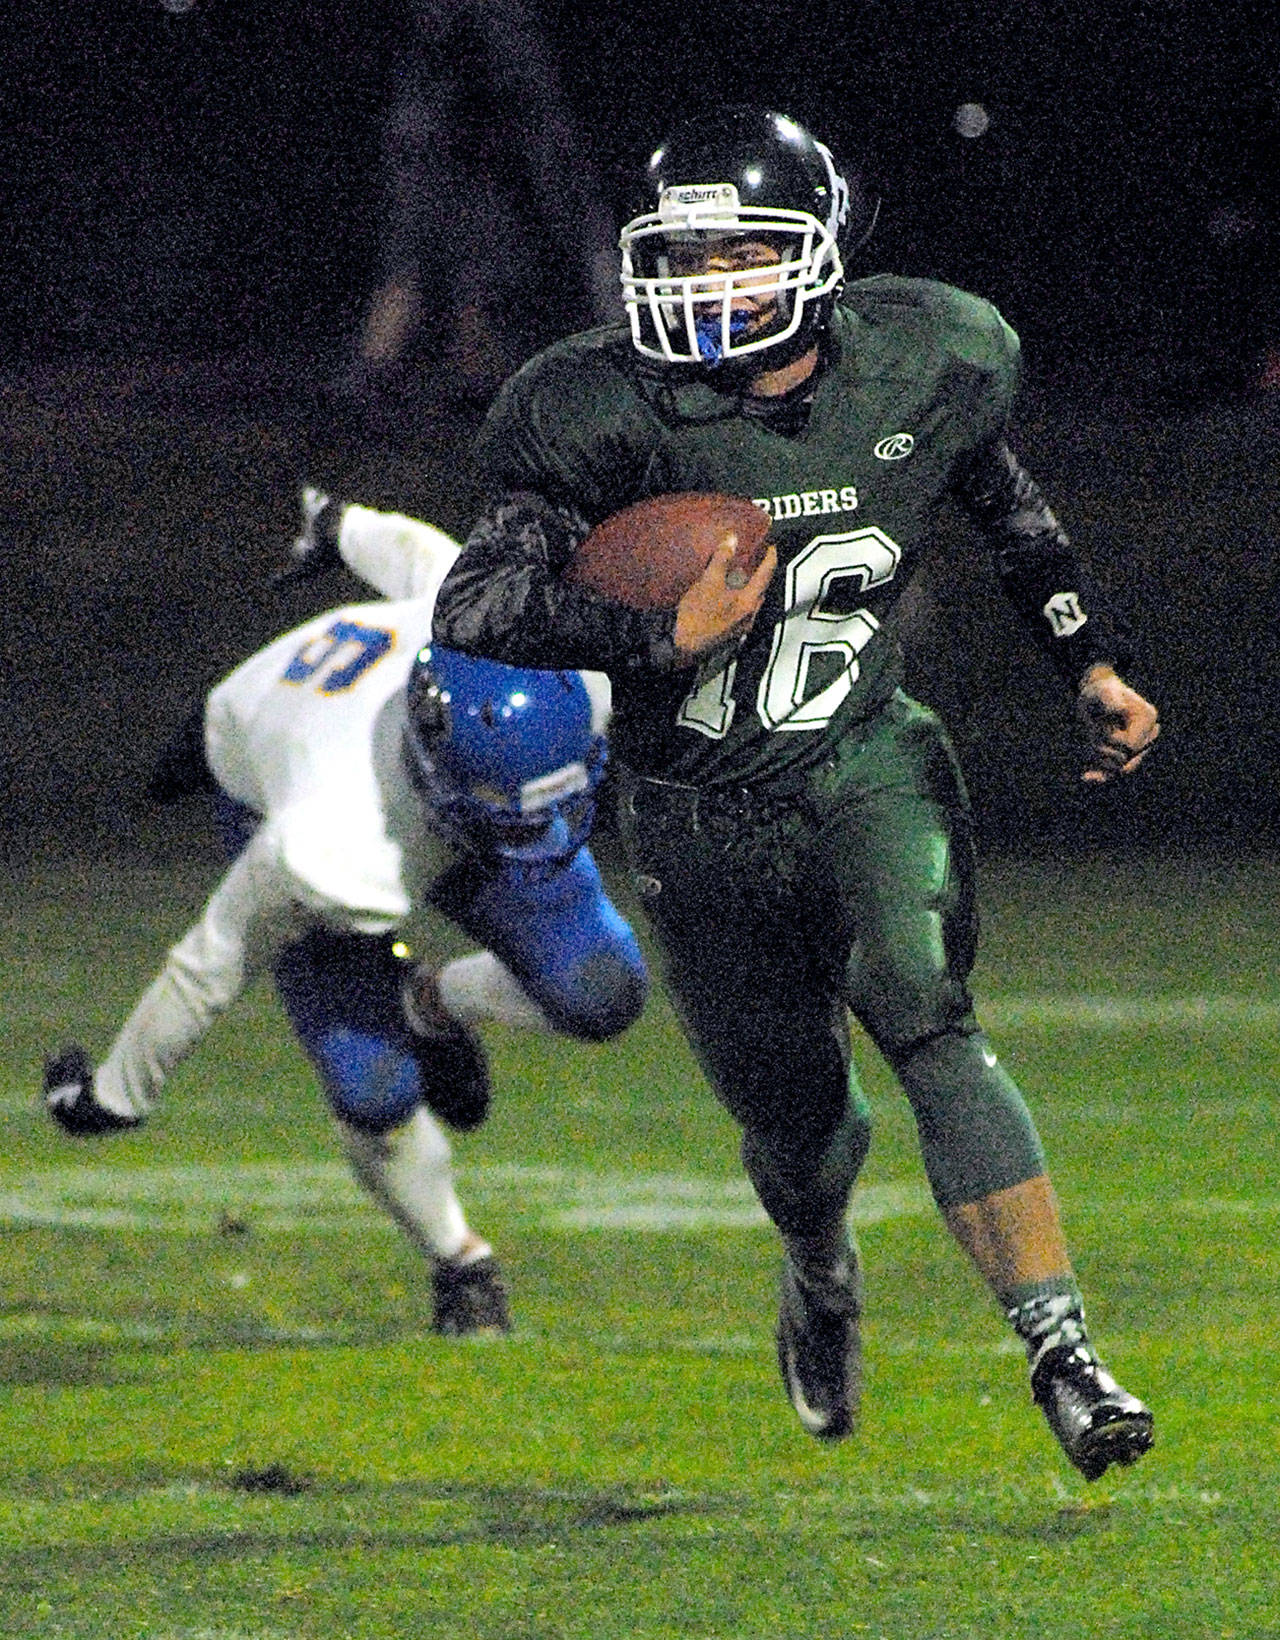 Port Angeles’ Easton Joslin rushes in the second quarter after evading the defense of Bremerton’s Abraham Parish on Friday at Civic Field.                                Keith Thorpe/Peninsula Daily News